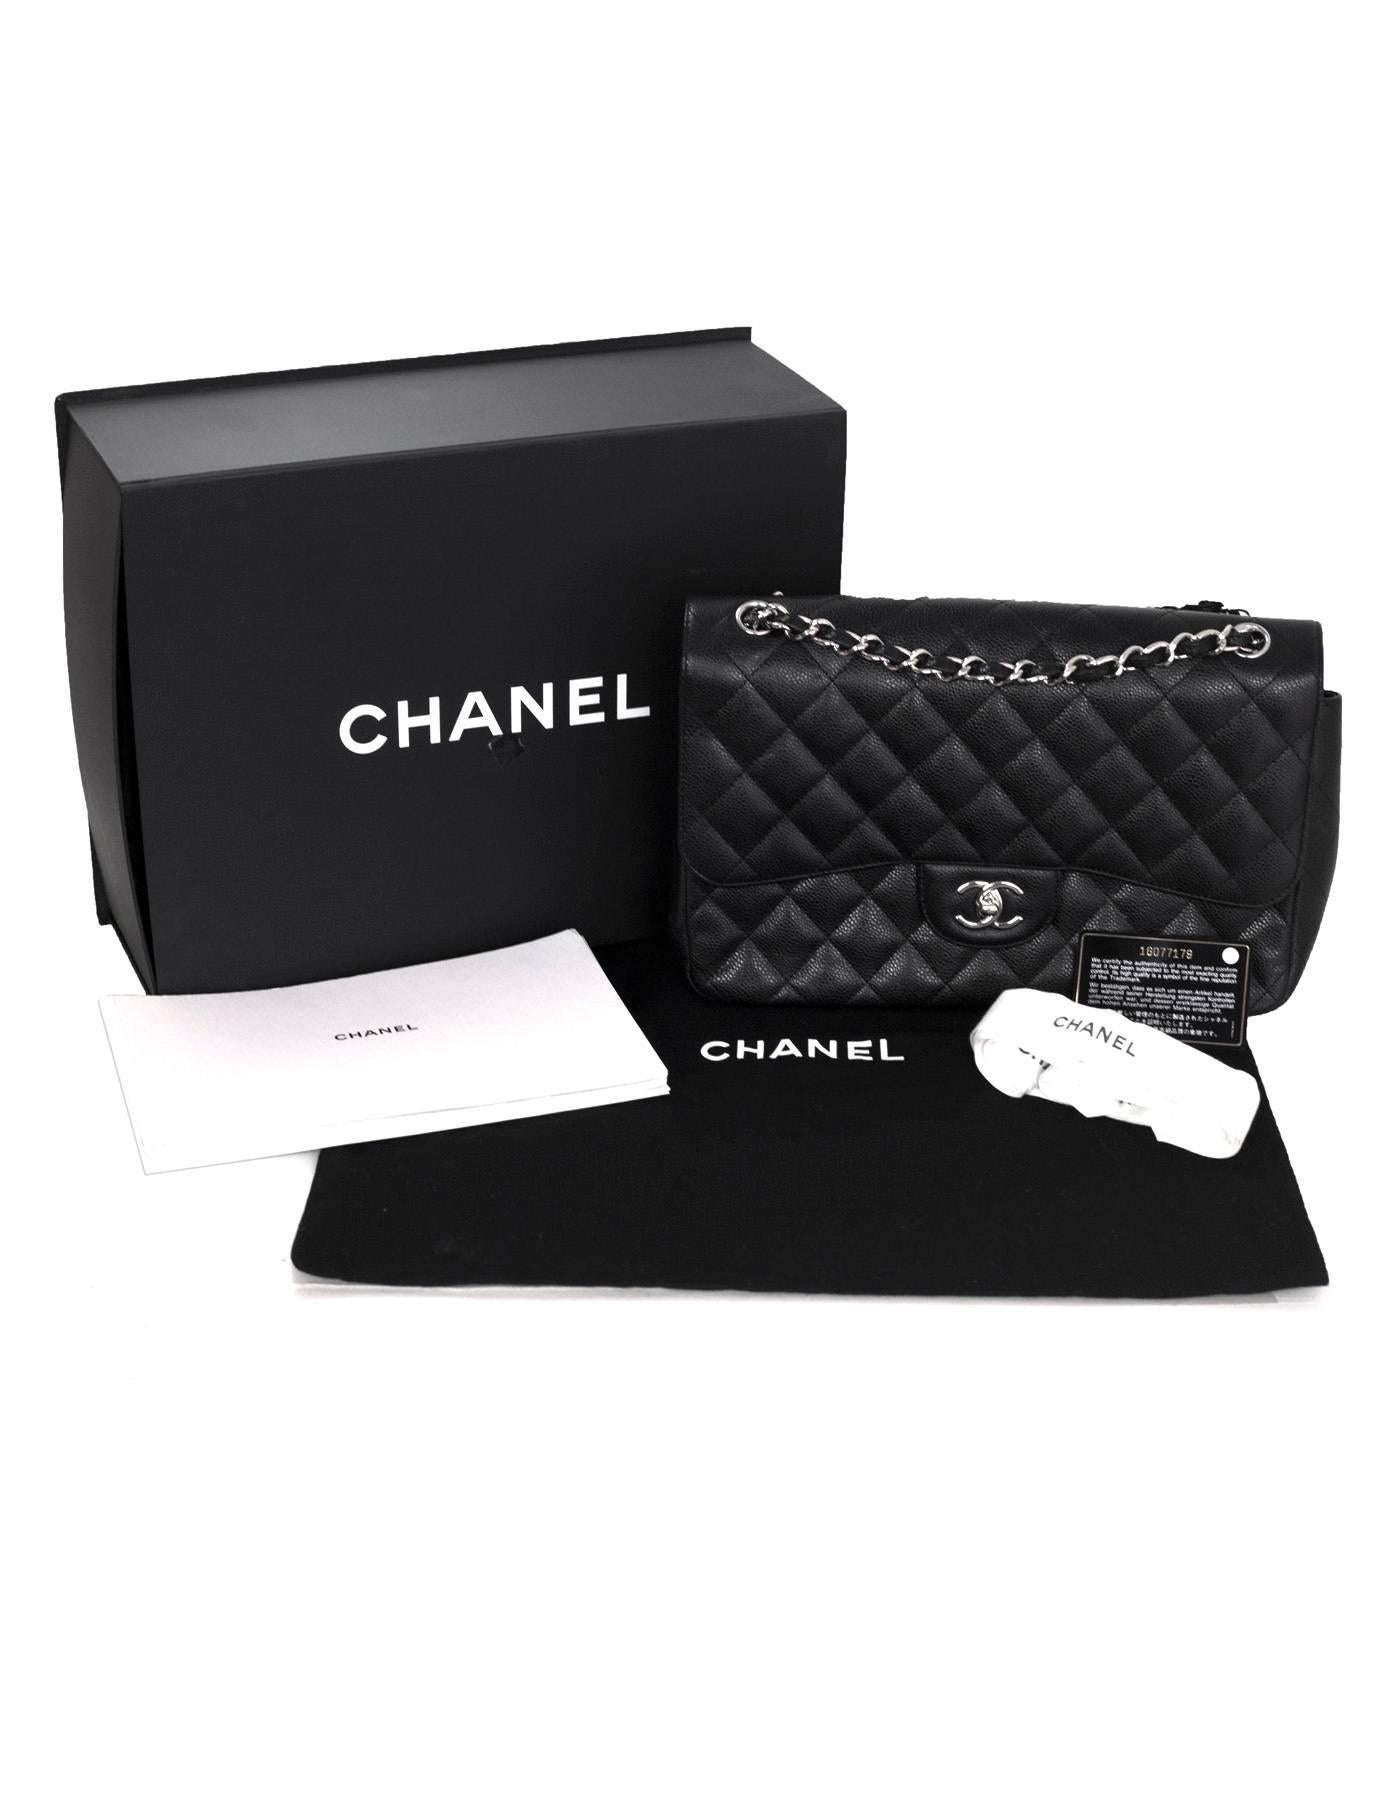 Chanel Black Caviar Leather Quilted Double Flap Jumbo Bag with SHW rt. $5, 900 5